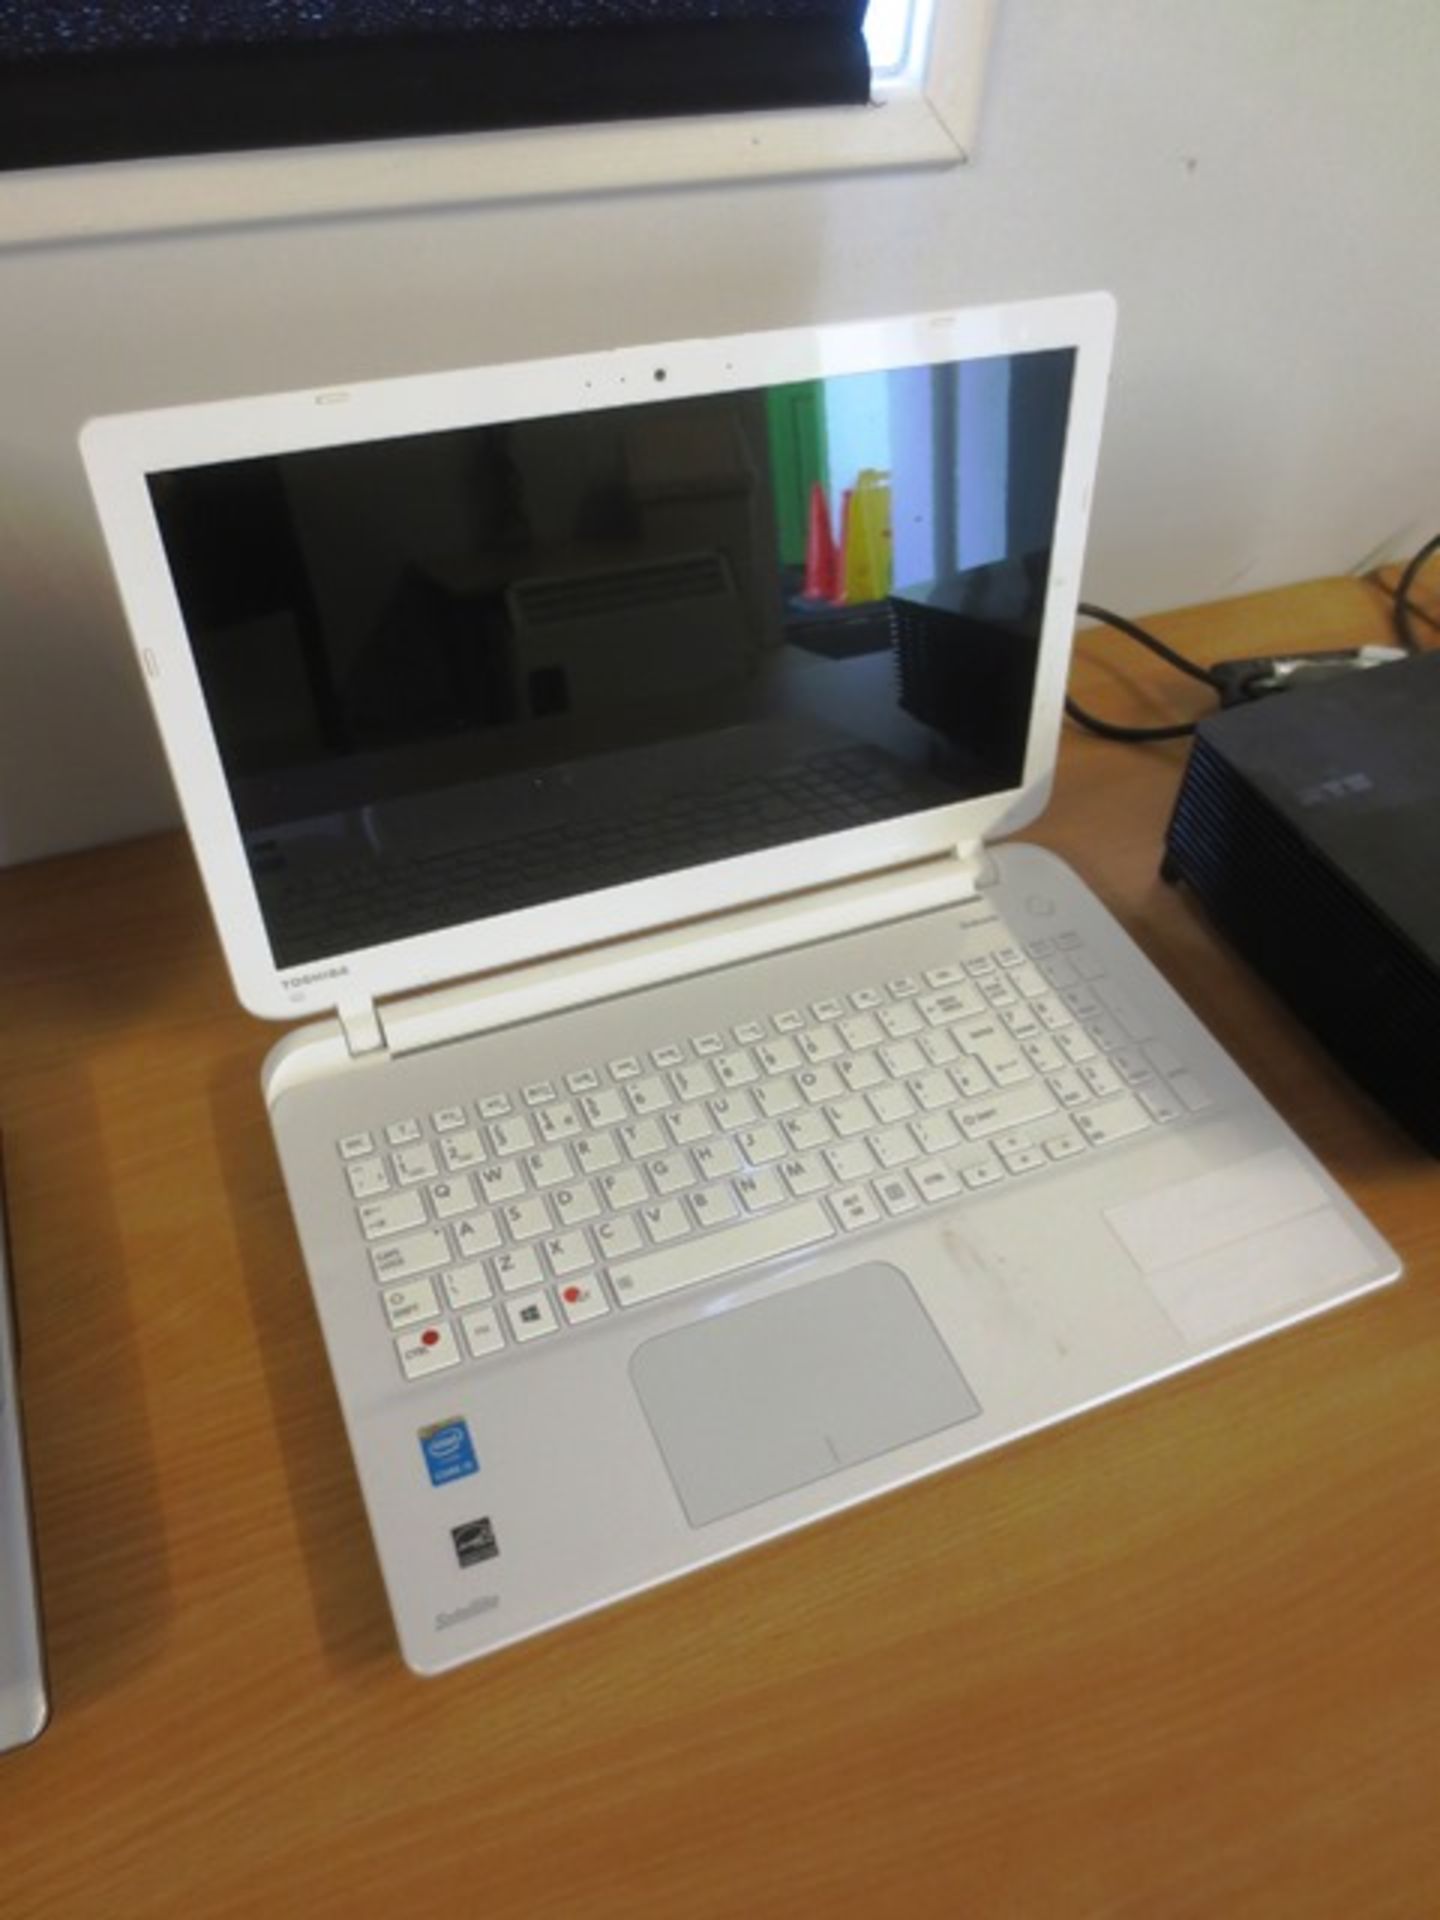 Toshiba Satellite L50-B-235 laptop computer and charger